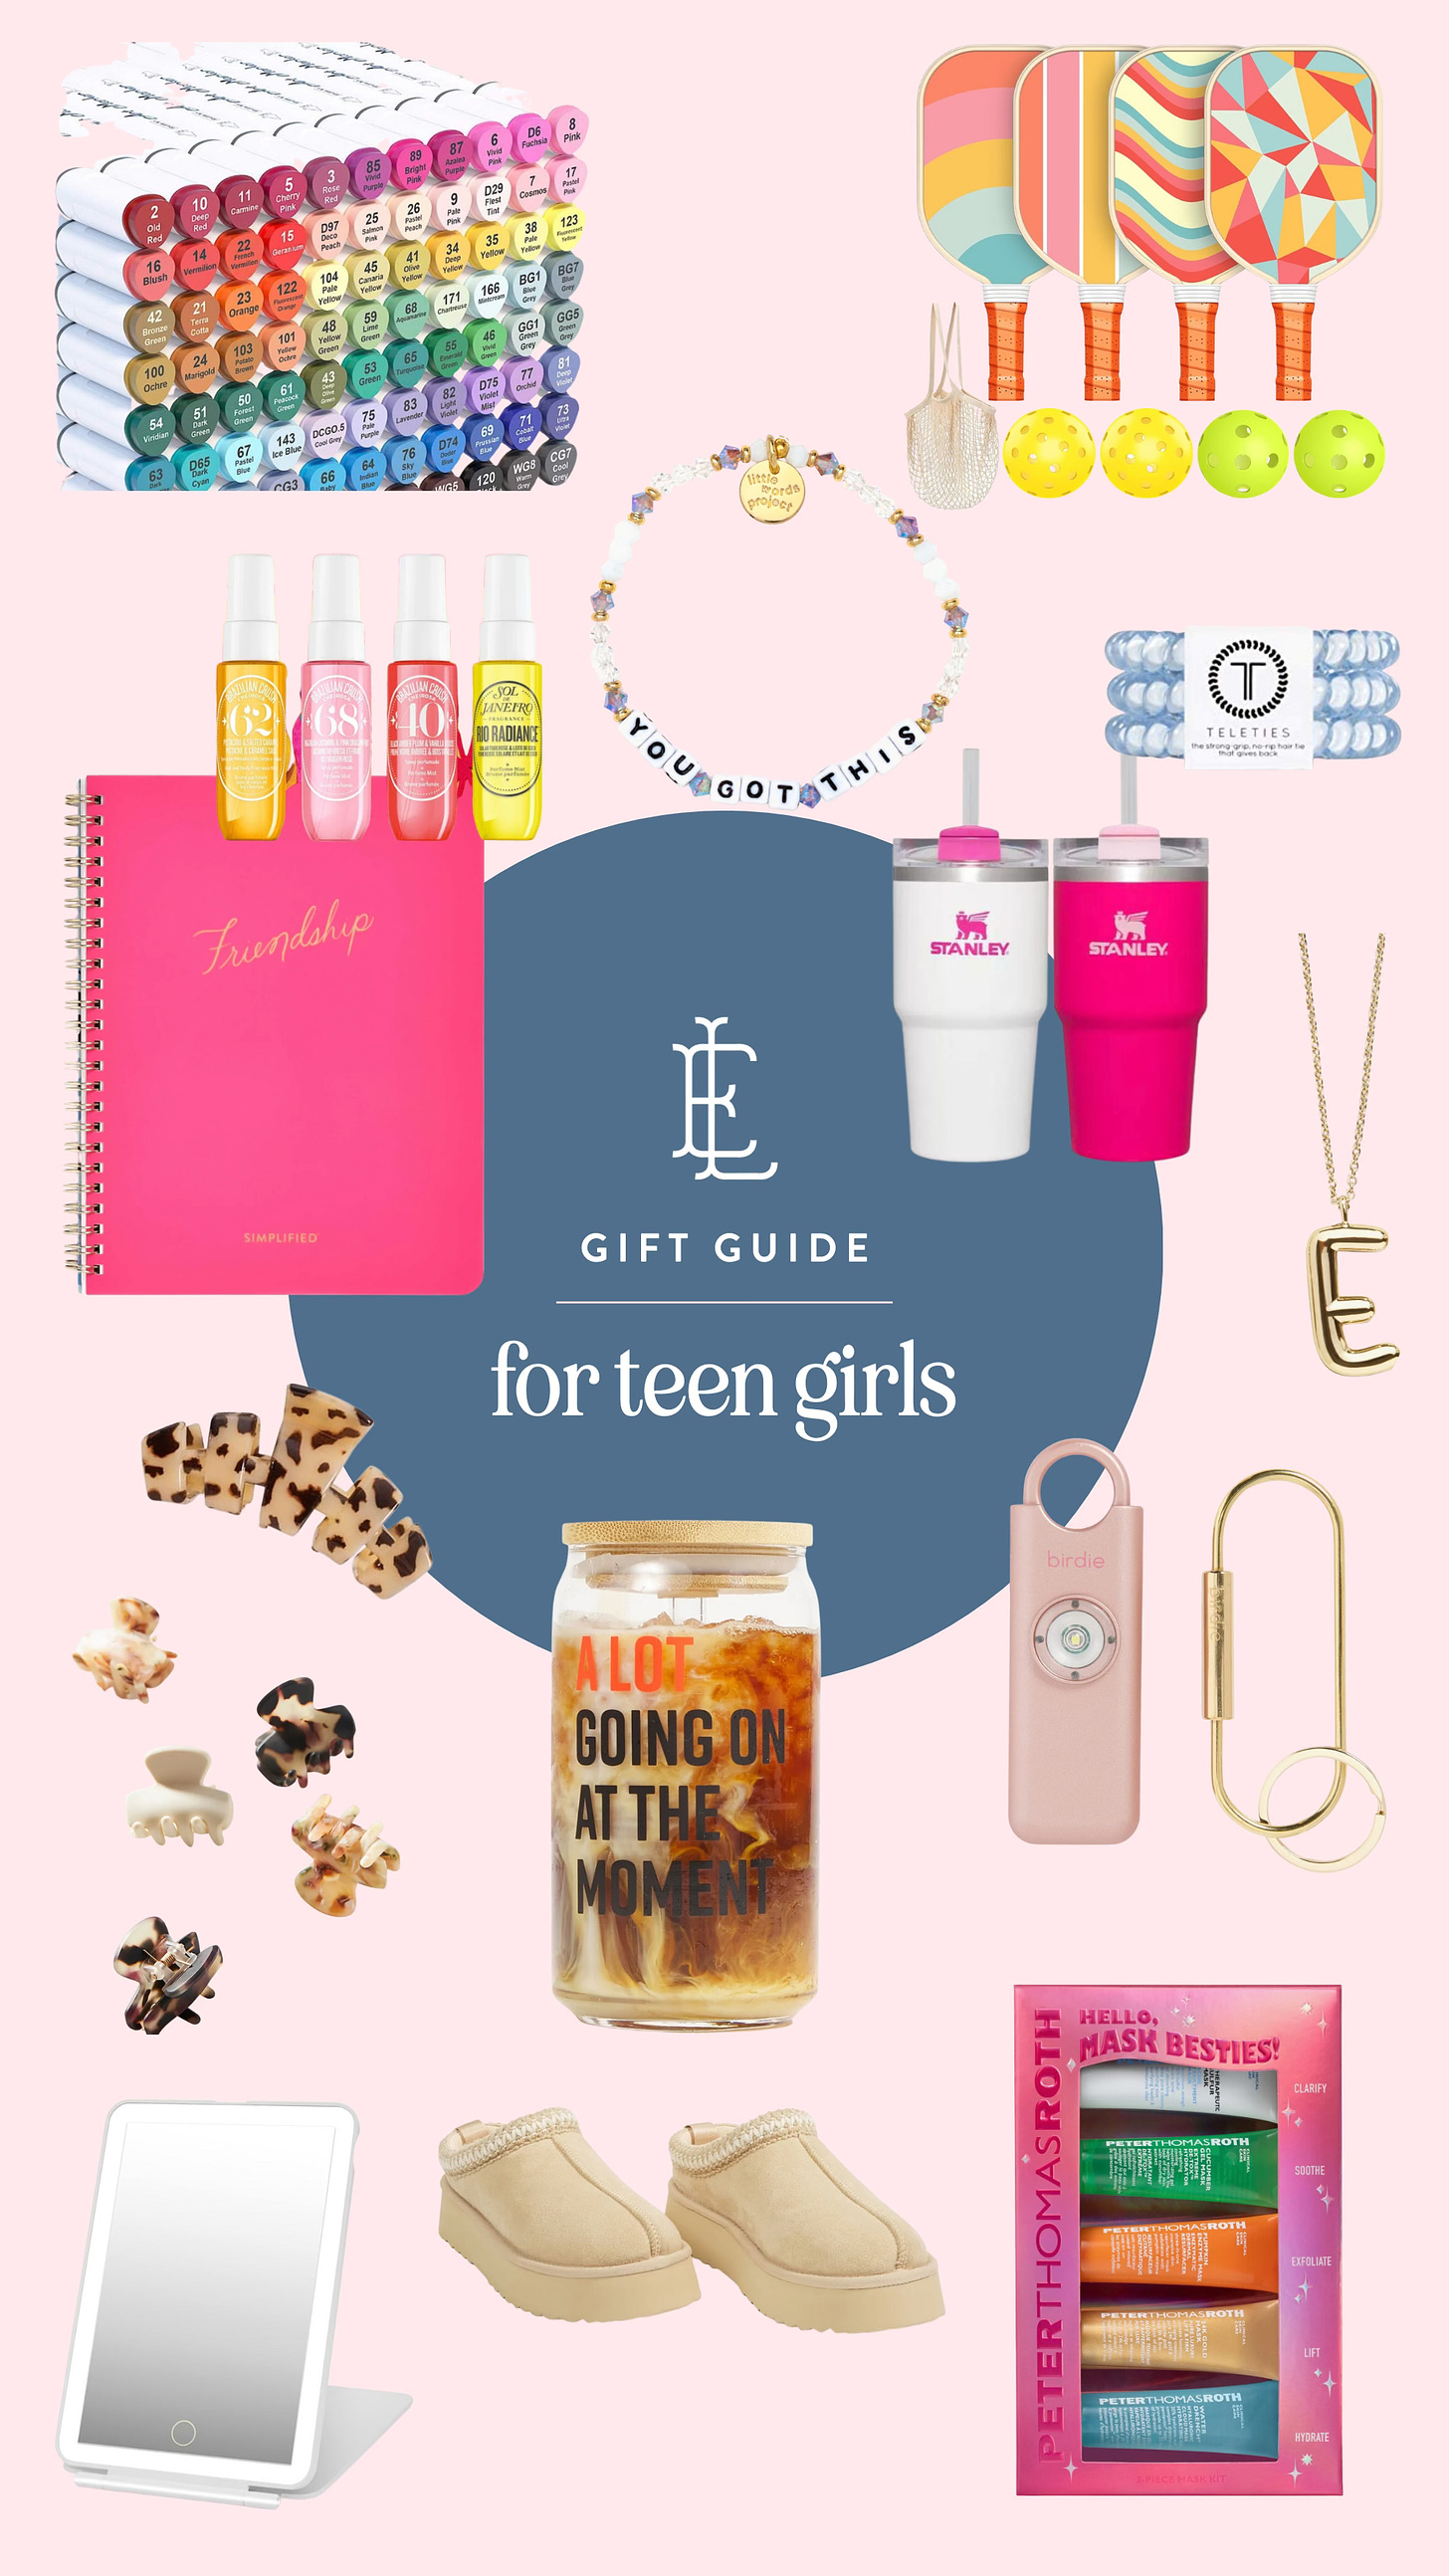 76 Gift Ideas for Kids & Teens 🎁 - Emily Ley's Substack